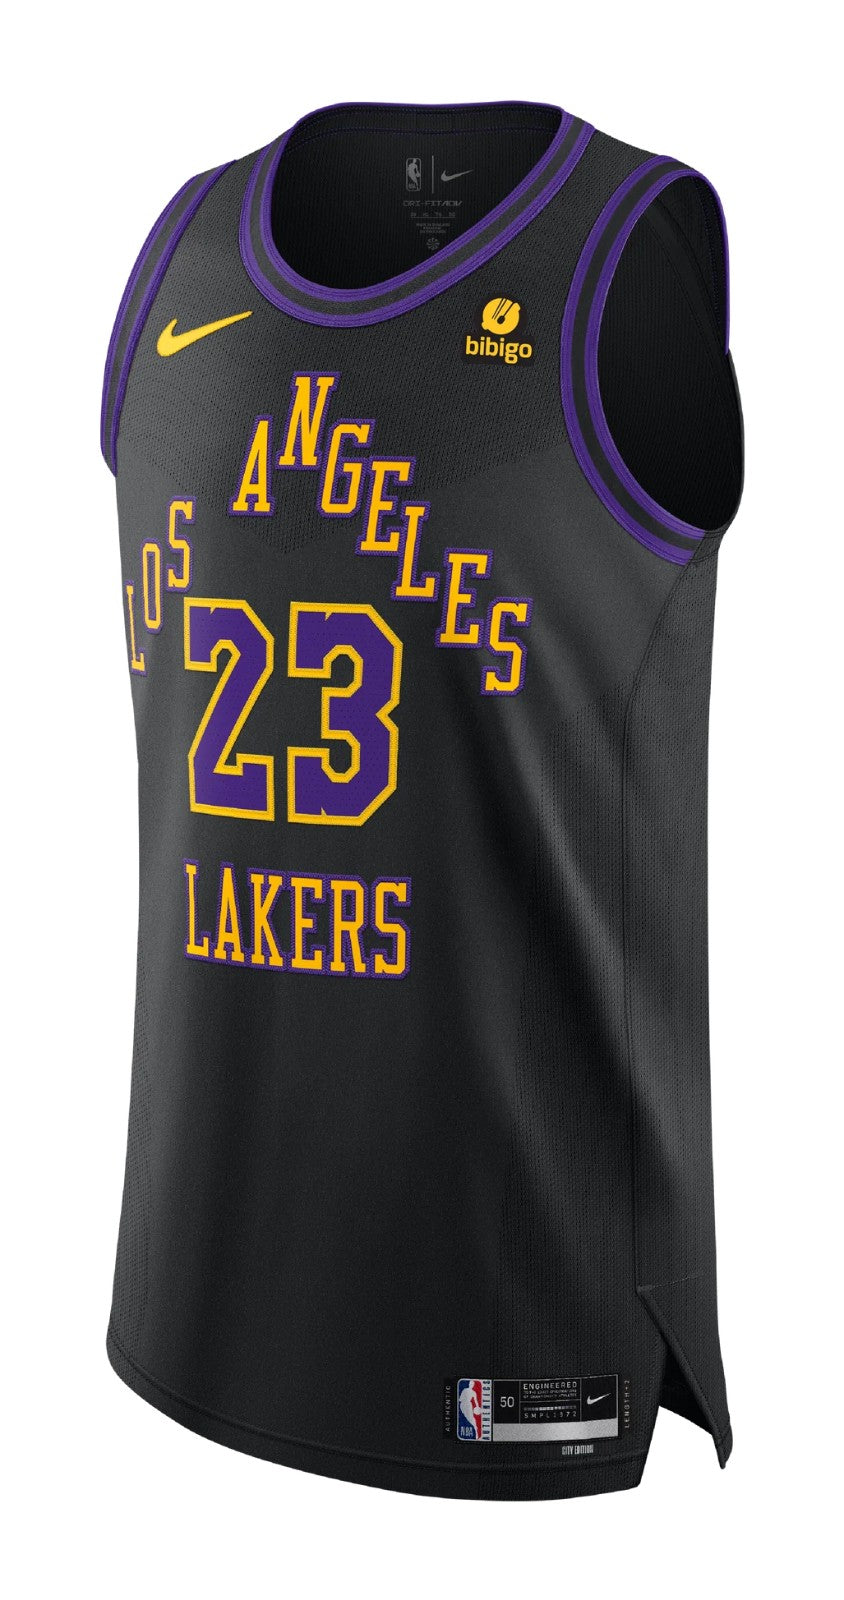 LOS ANGELES LAKERS CITY JERSEY 23/24